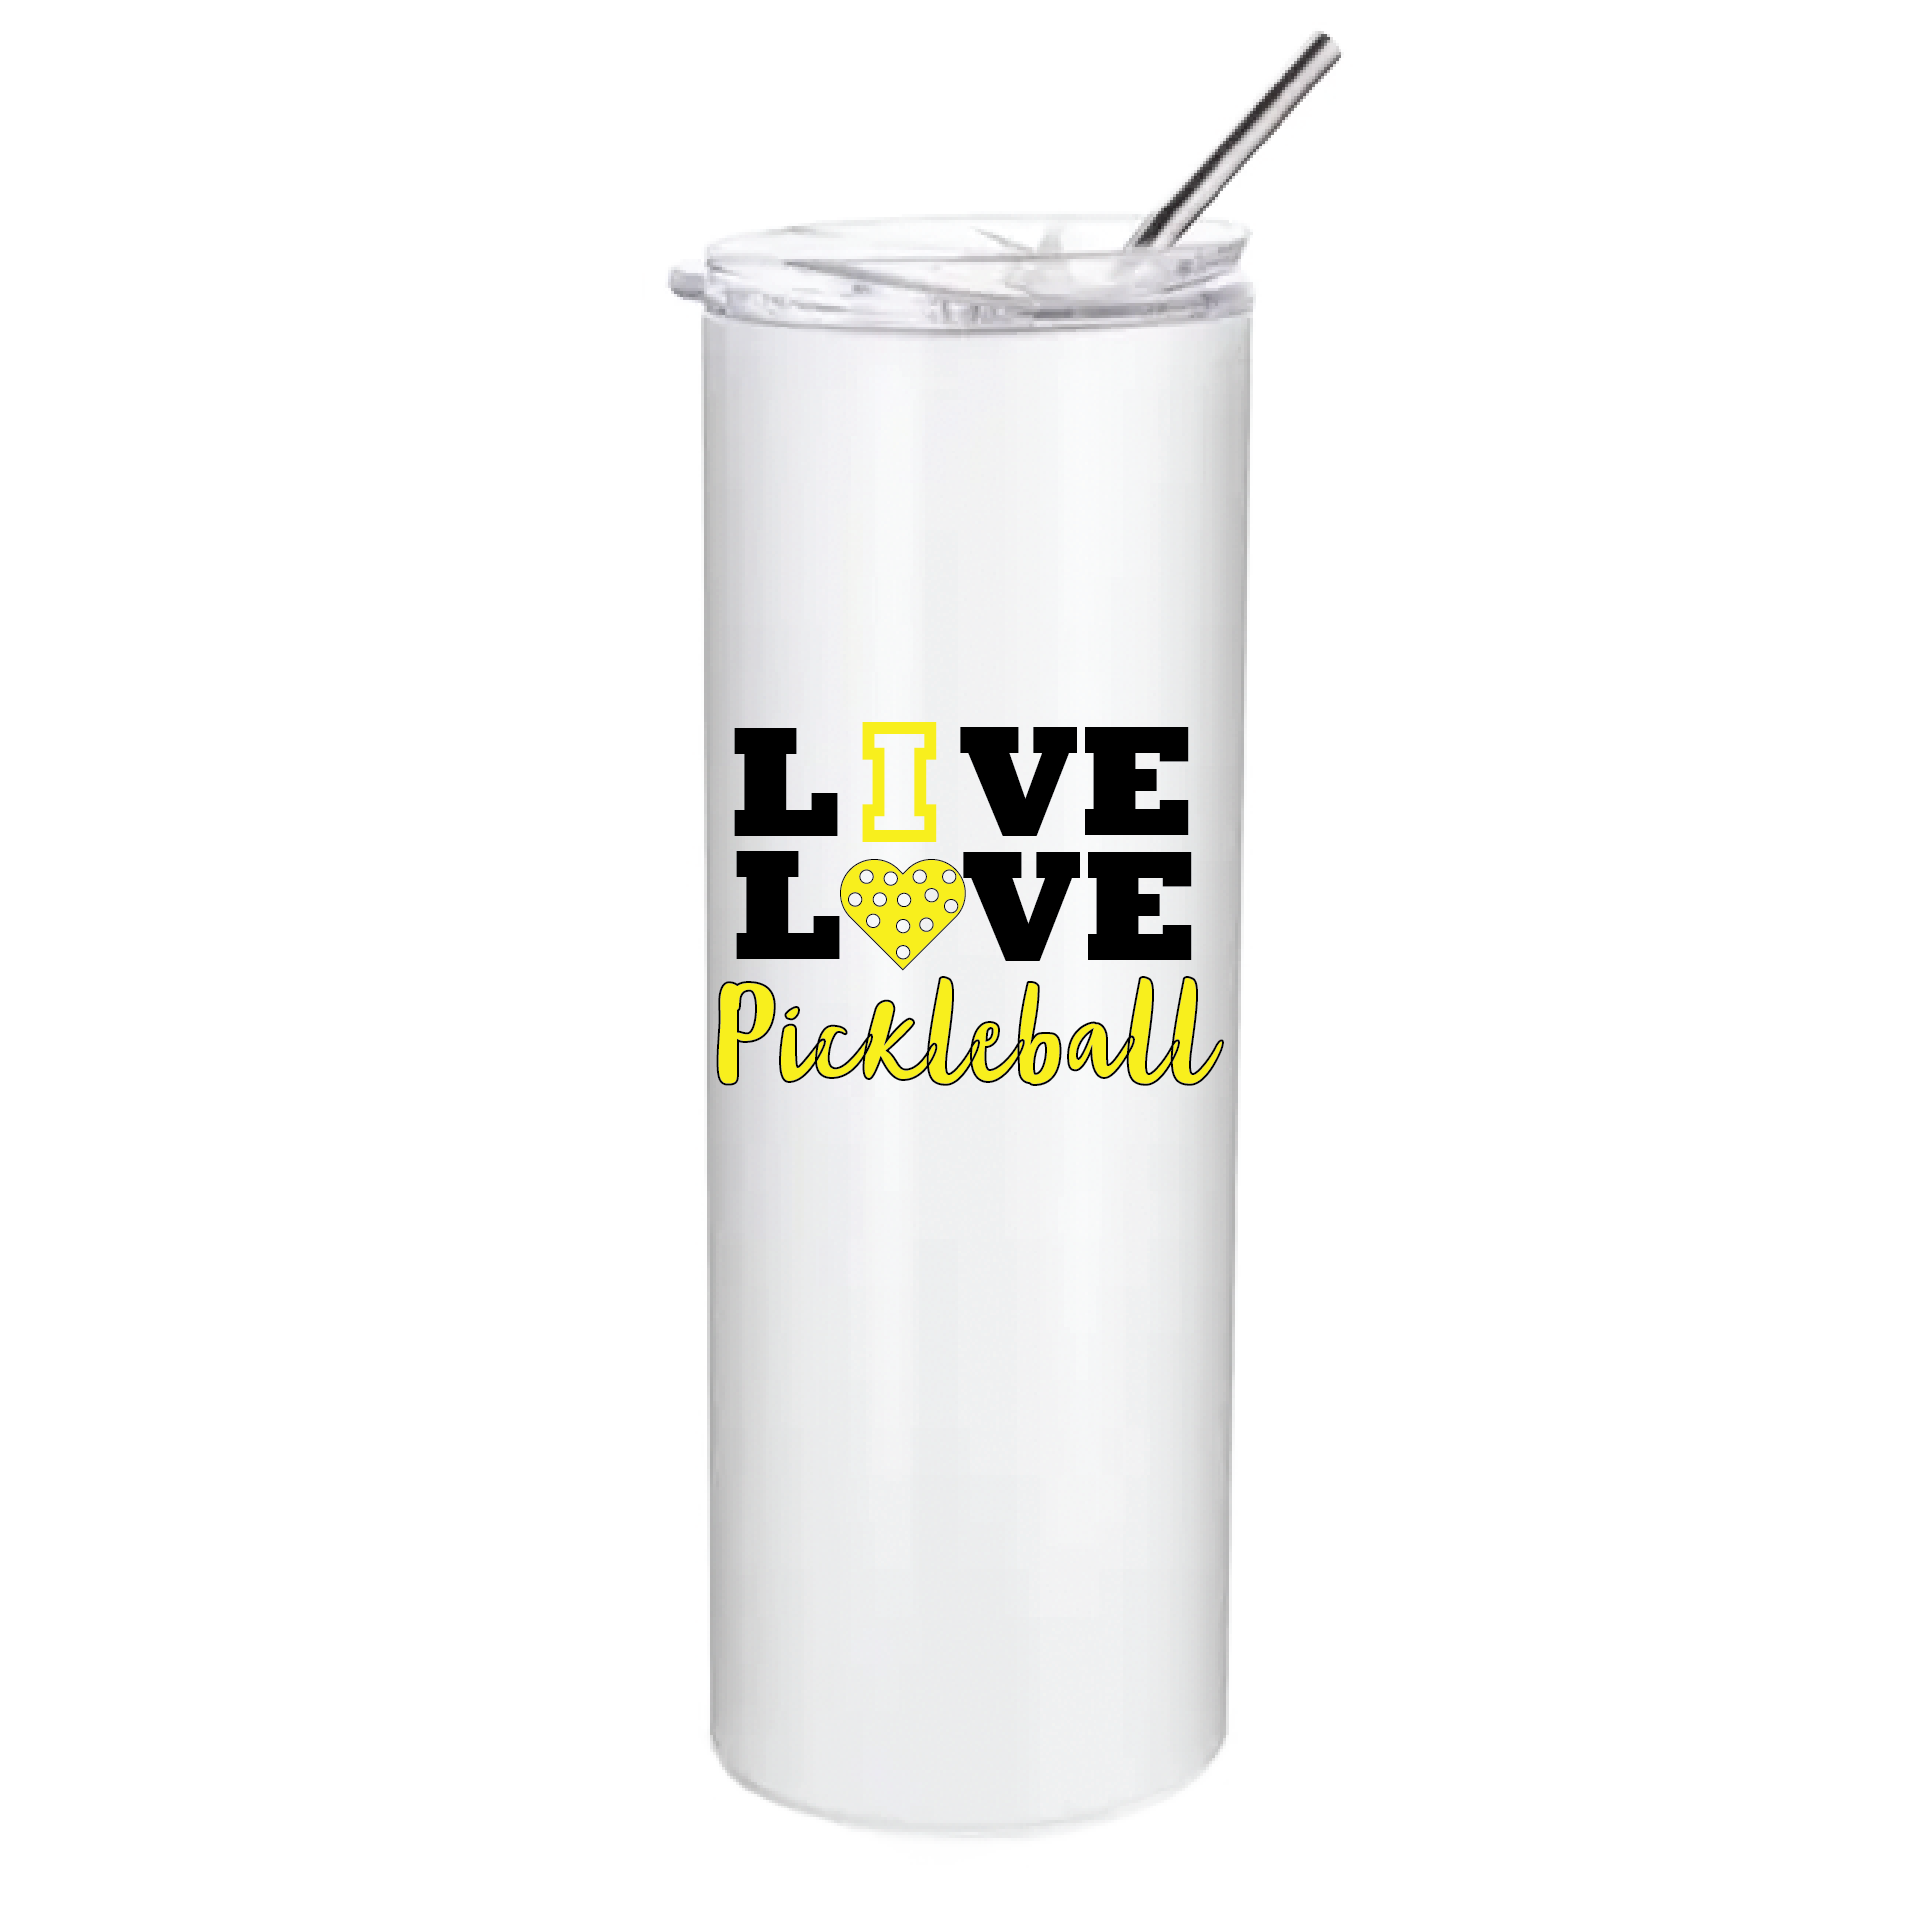 Pickleball Design: Live Love Pickleball  These stainless steel Tumblers help keep your drink cold for 24 hours while you are out on the court playing!! Also can help keep warm drinks warm for 8 hours. No BPA and a sweat-free coating. These are also PP food grade drink containers. Comes with a splash proof lid with a seal ring which makes it beautiful and durable. One-piece molding makes it crack free for long time durability.